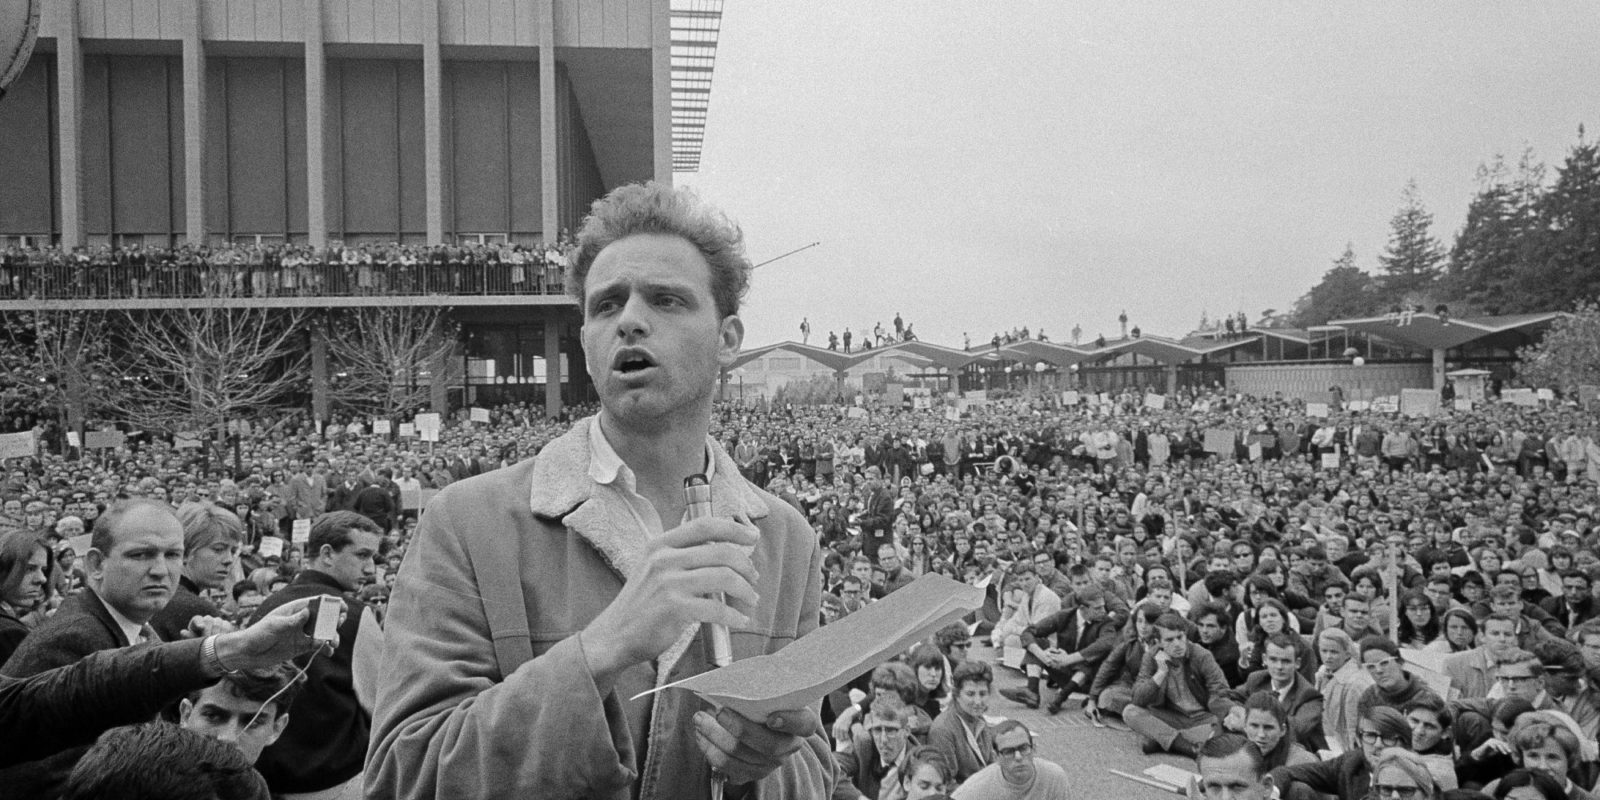 FILE - In this Dec. 7, 1964 file photo, Mario Savio, leader of the Berkeley Free Speech Movement, speaks to assembled students on the campus at the University of California in Berkeley, Calif. The fall of 2014 marks the 50th anniversary of the Free Speech Movement, a protest that only lasted for three months but set the stage for the turbulent 1960s. (AP Photo/Robert W. Klein, File)